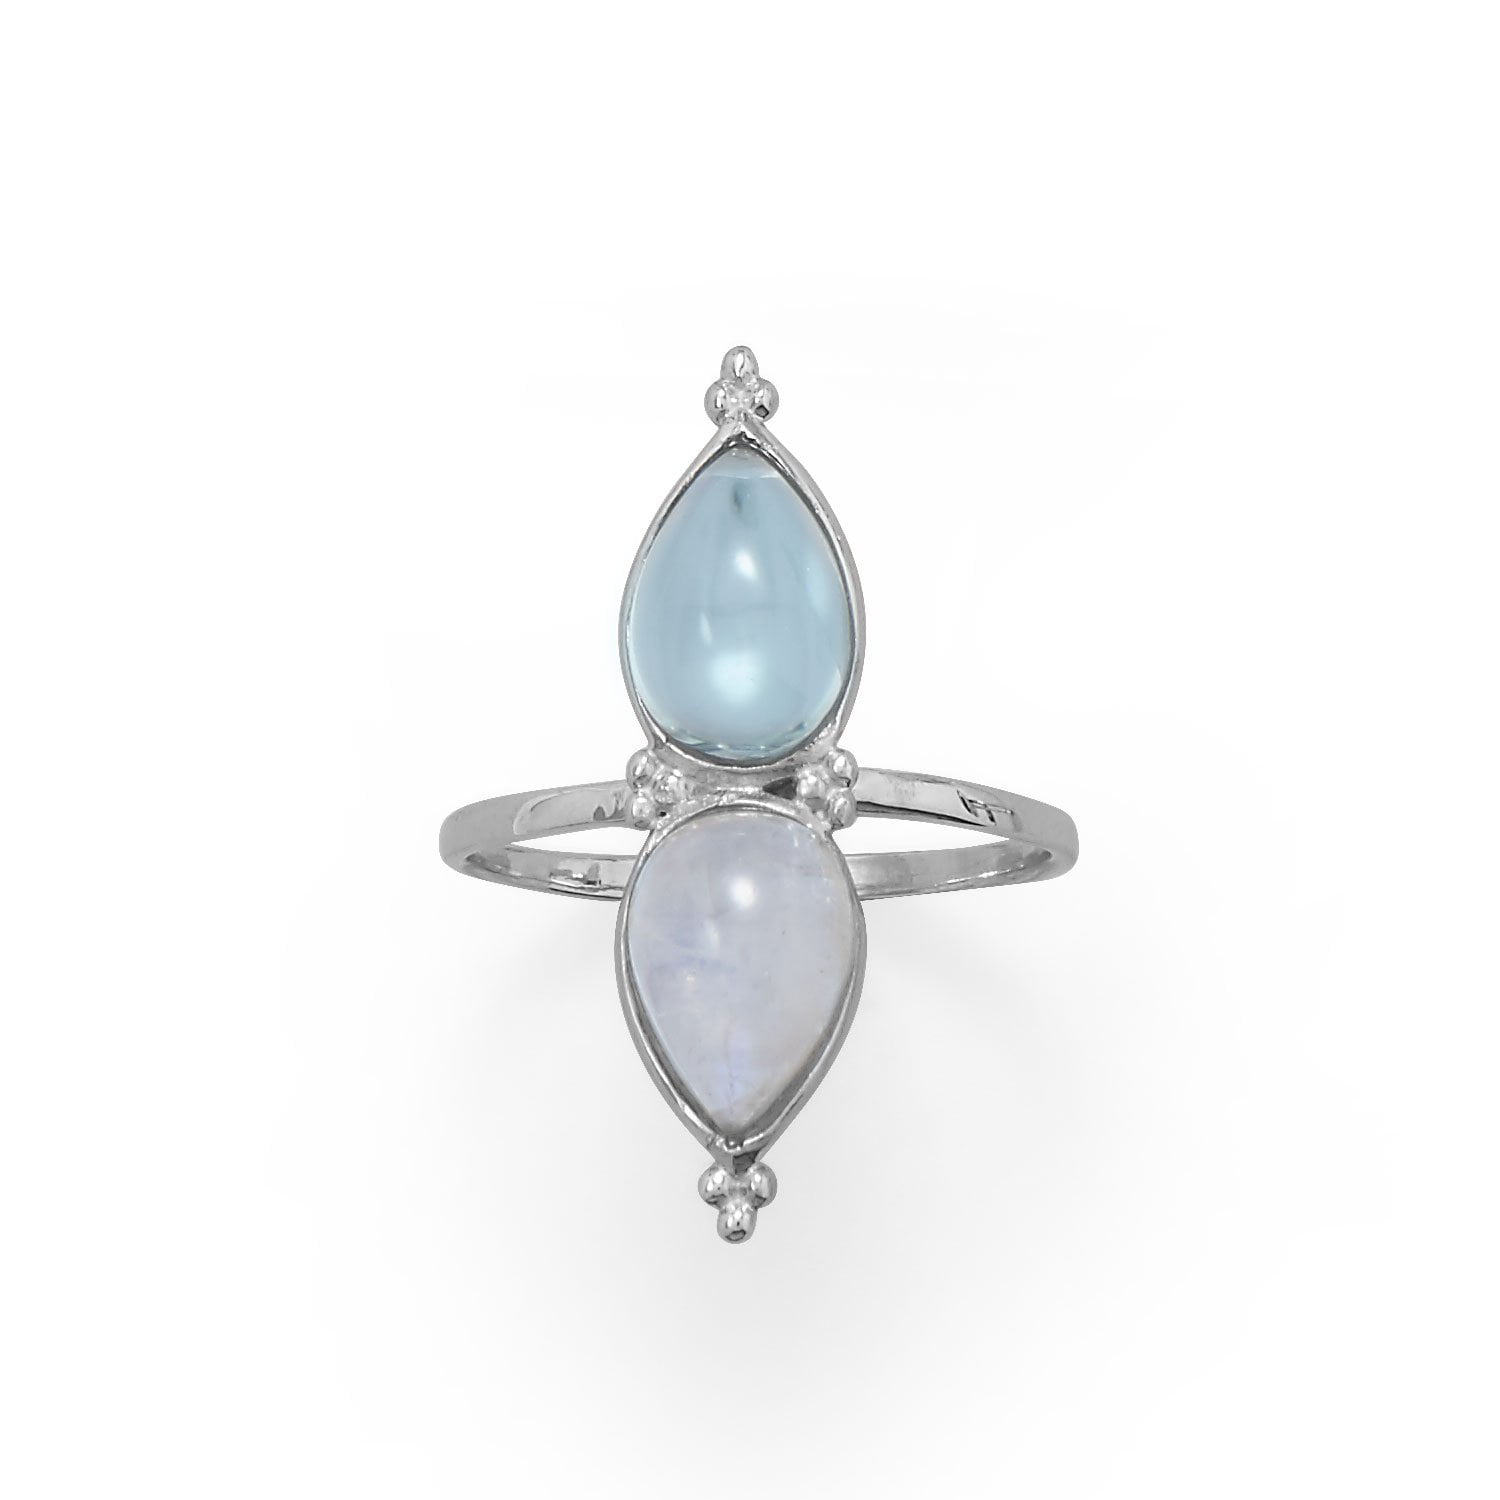 Trio Stone Rainbow Moonstone 925 Sterling Silver Stackable Women's Wedding Ring 